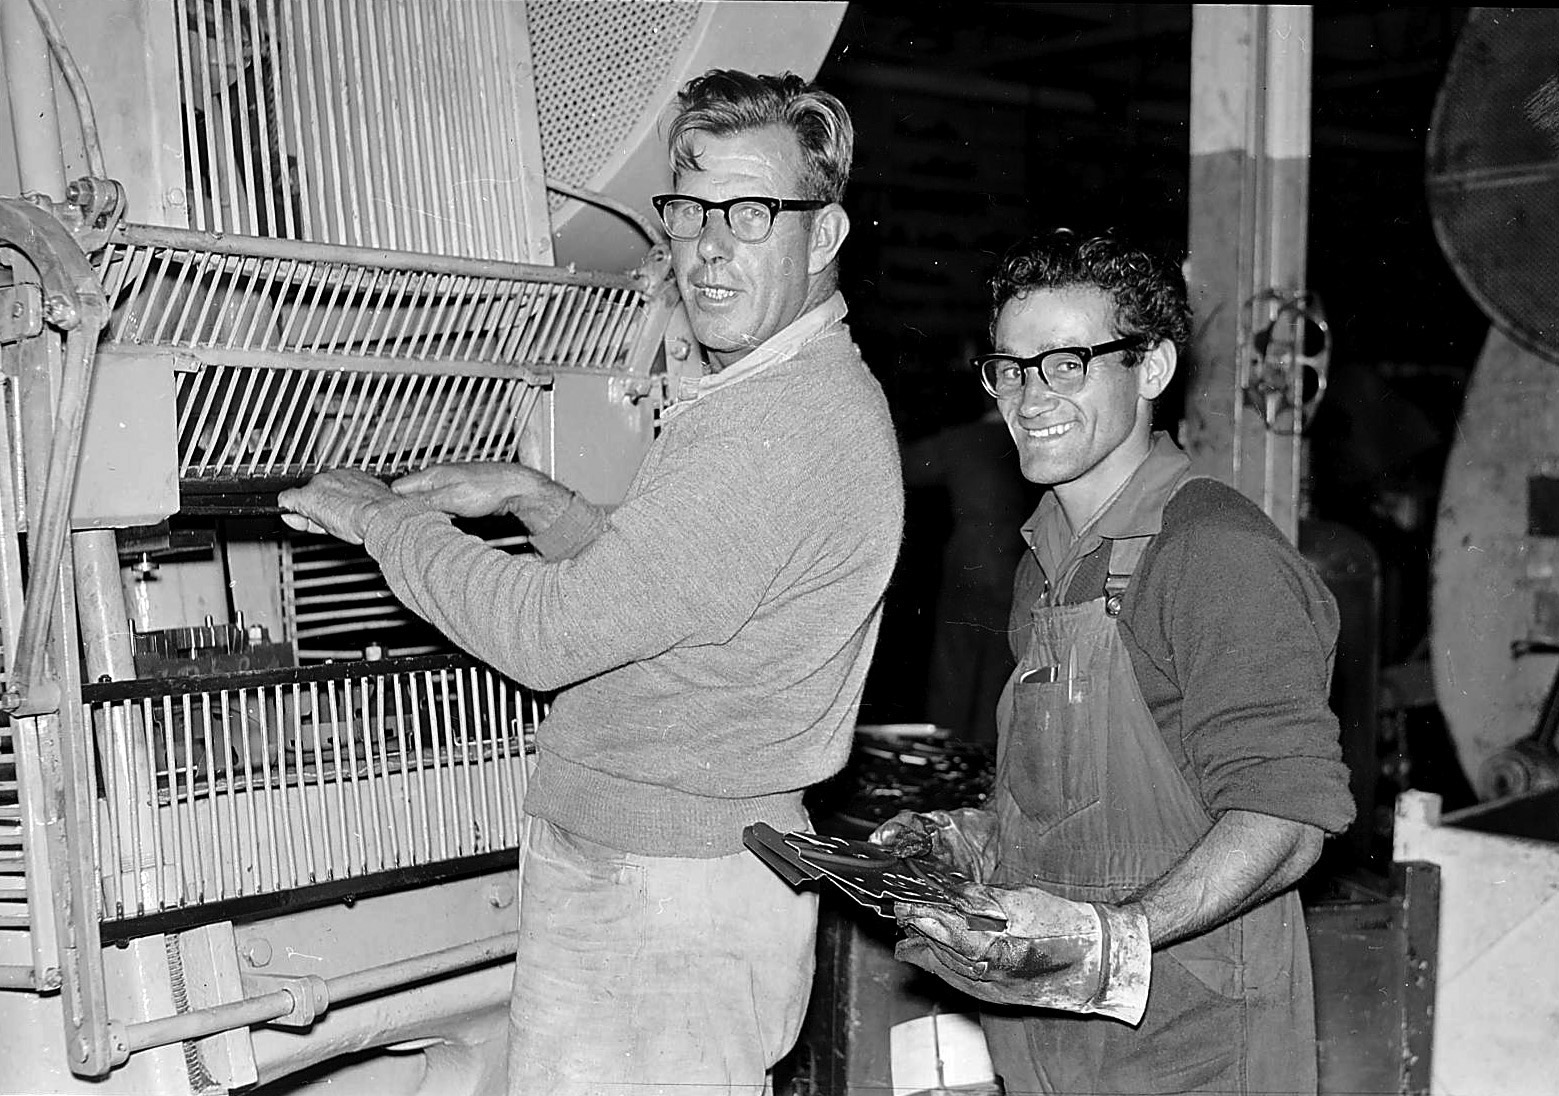 A black and white photo of two men, in overalls and jumpers working on a machine